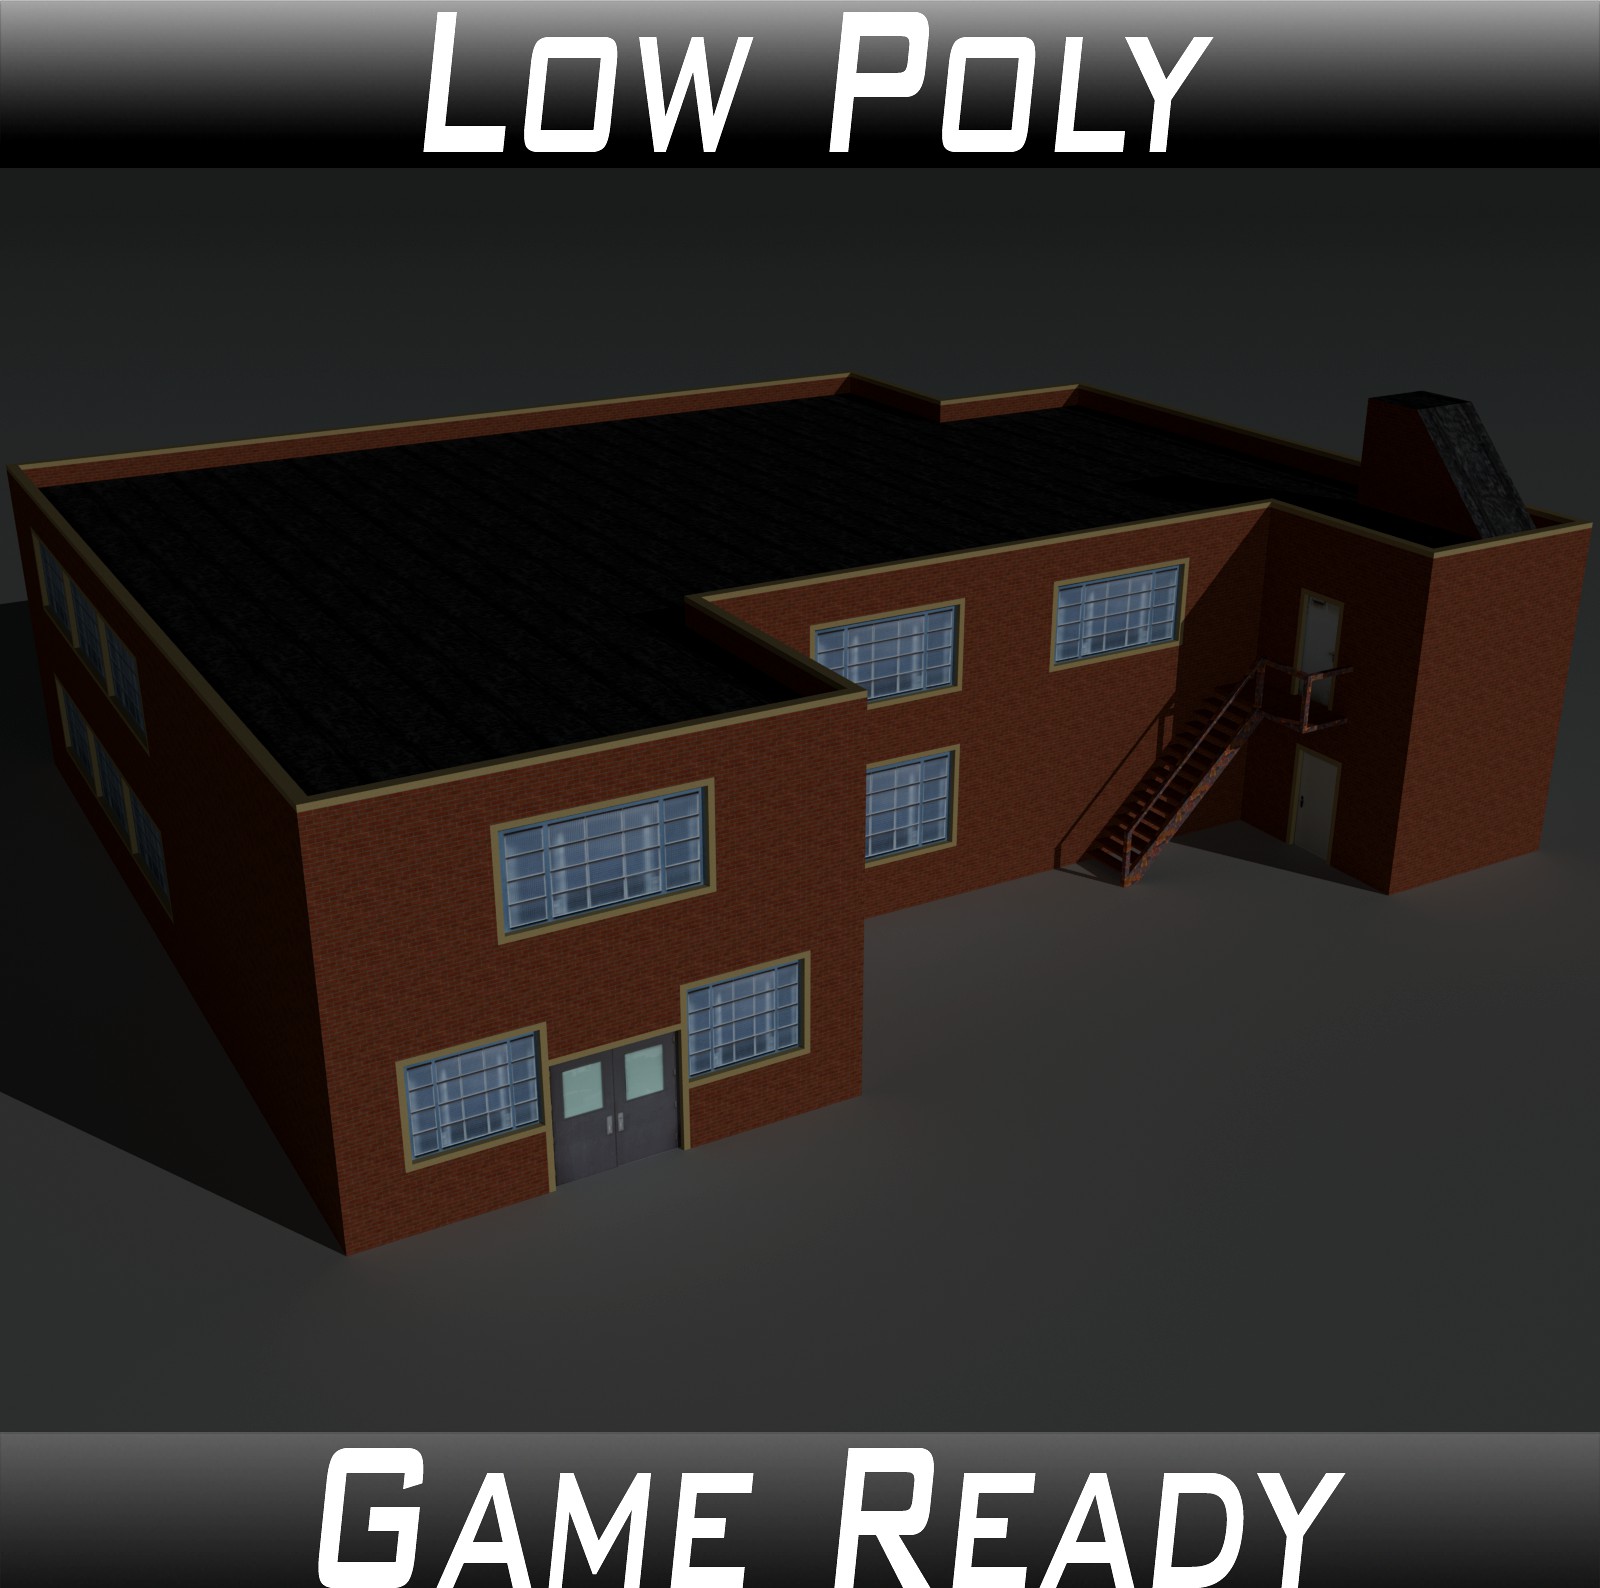 Low Poly Factory Building 33 - Extended Licence